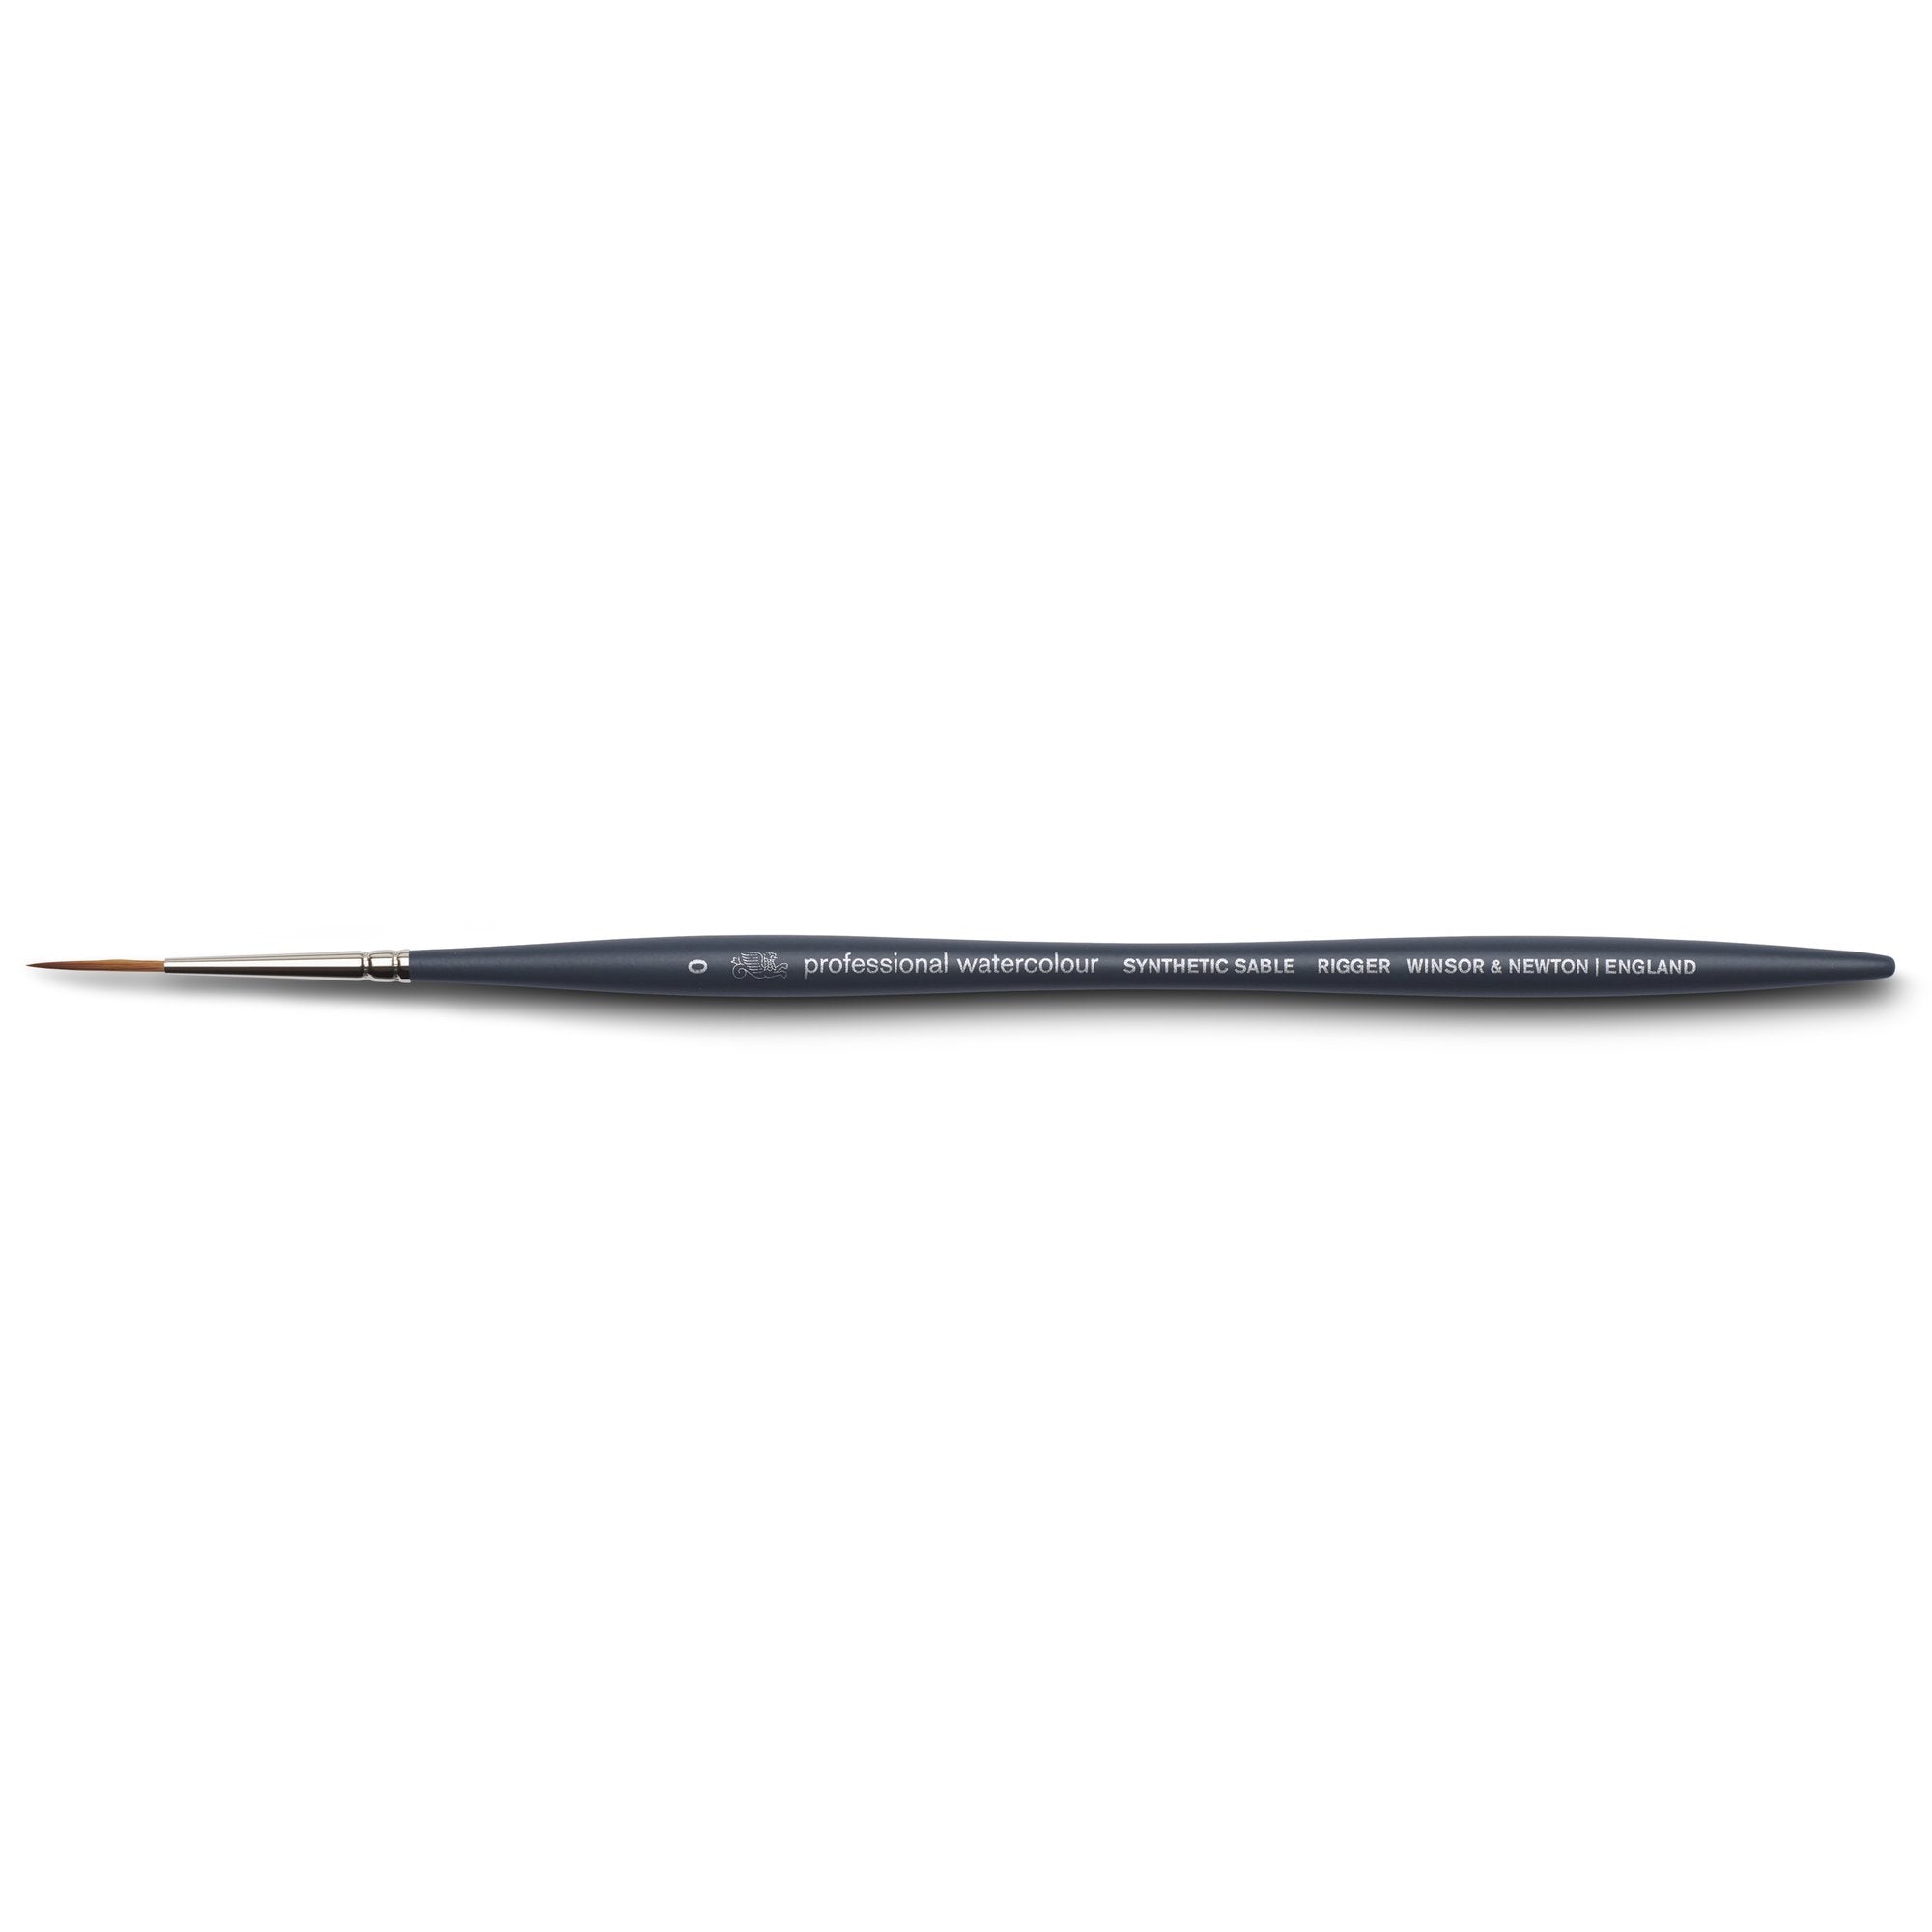 Winsor & Newton Professional Watercolour Synthetic Sable Brush Rigger 0